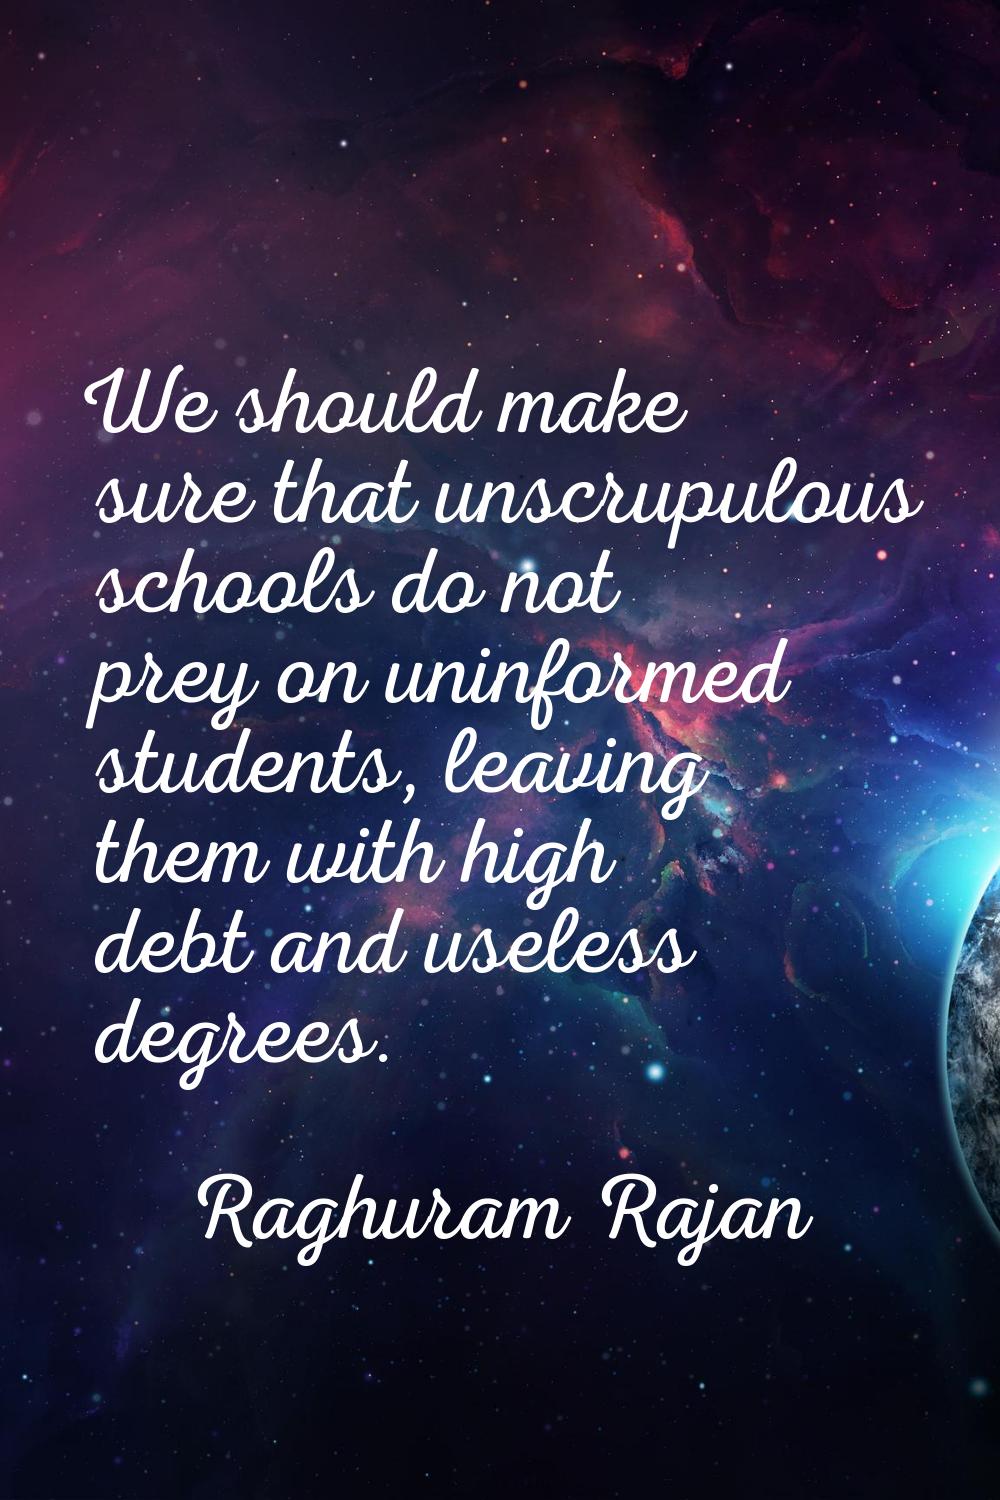 We should make sure that unscrupulous schools do not prey on uninformed students, leaving them with